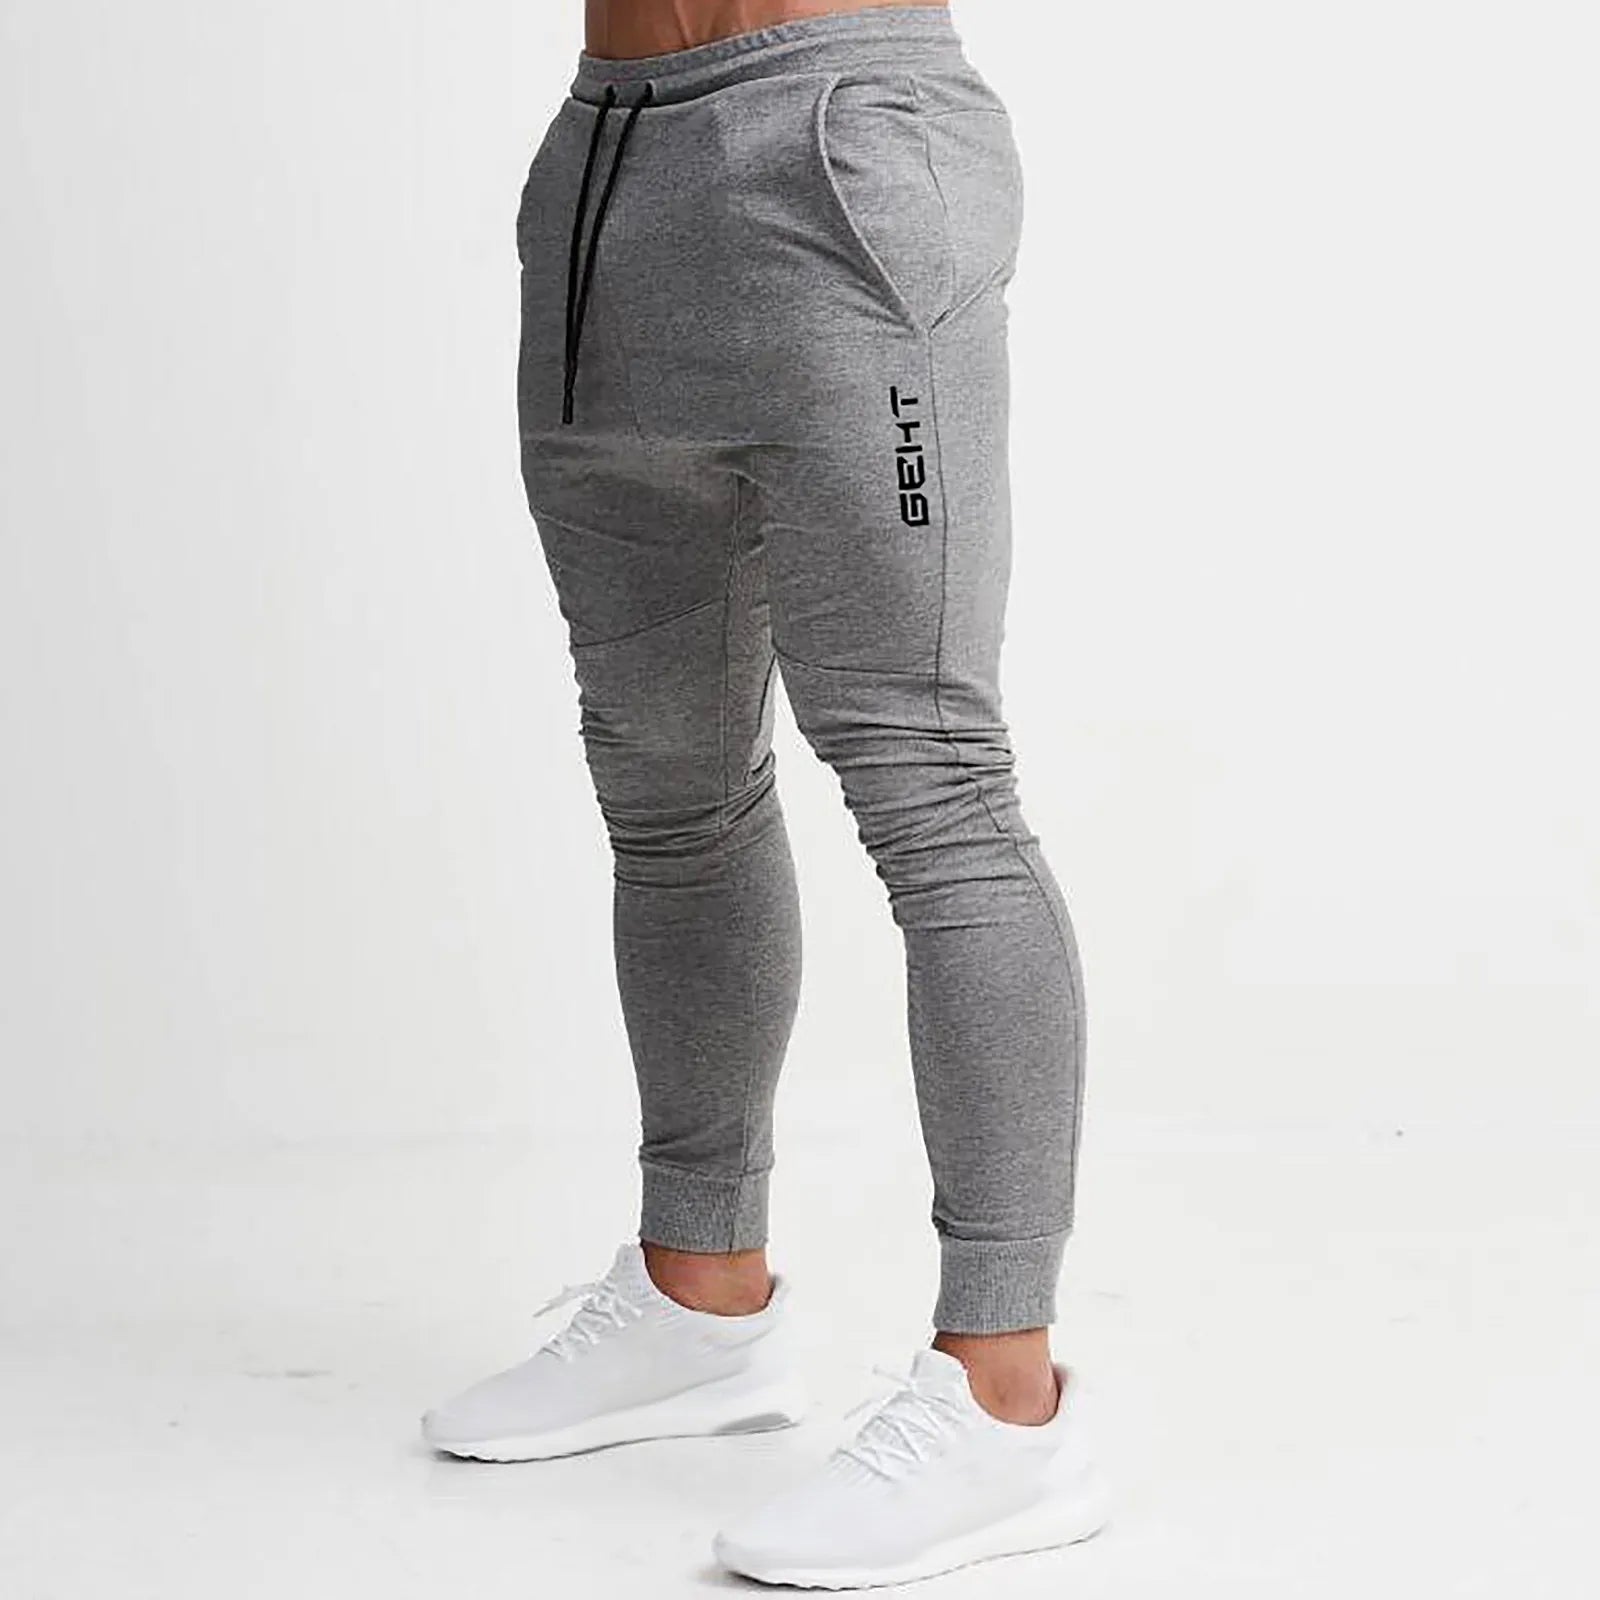 Mens Athletic Sweatpants | Casual Joggers, Gym Pants, Sports - VarietyGifts